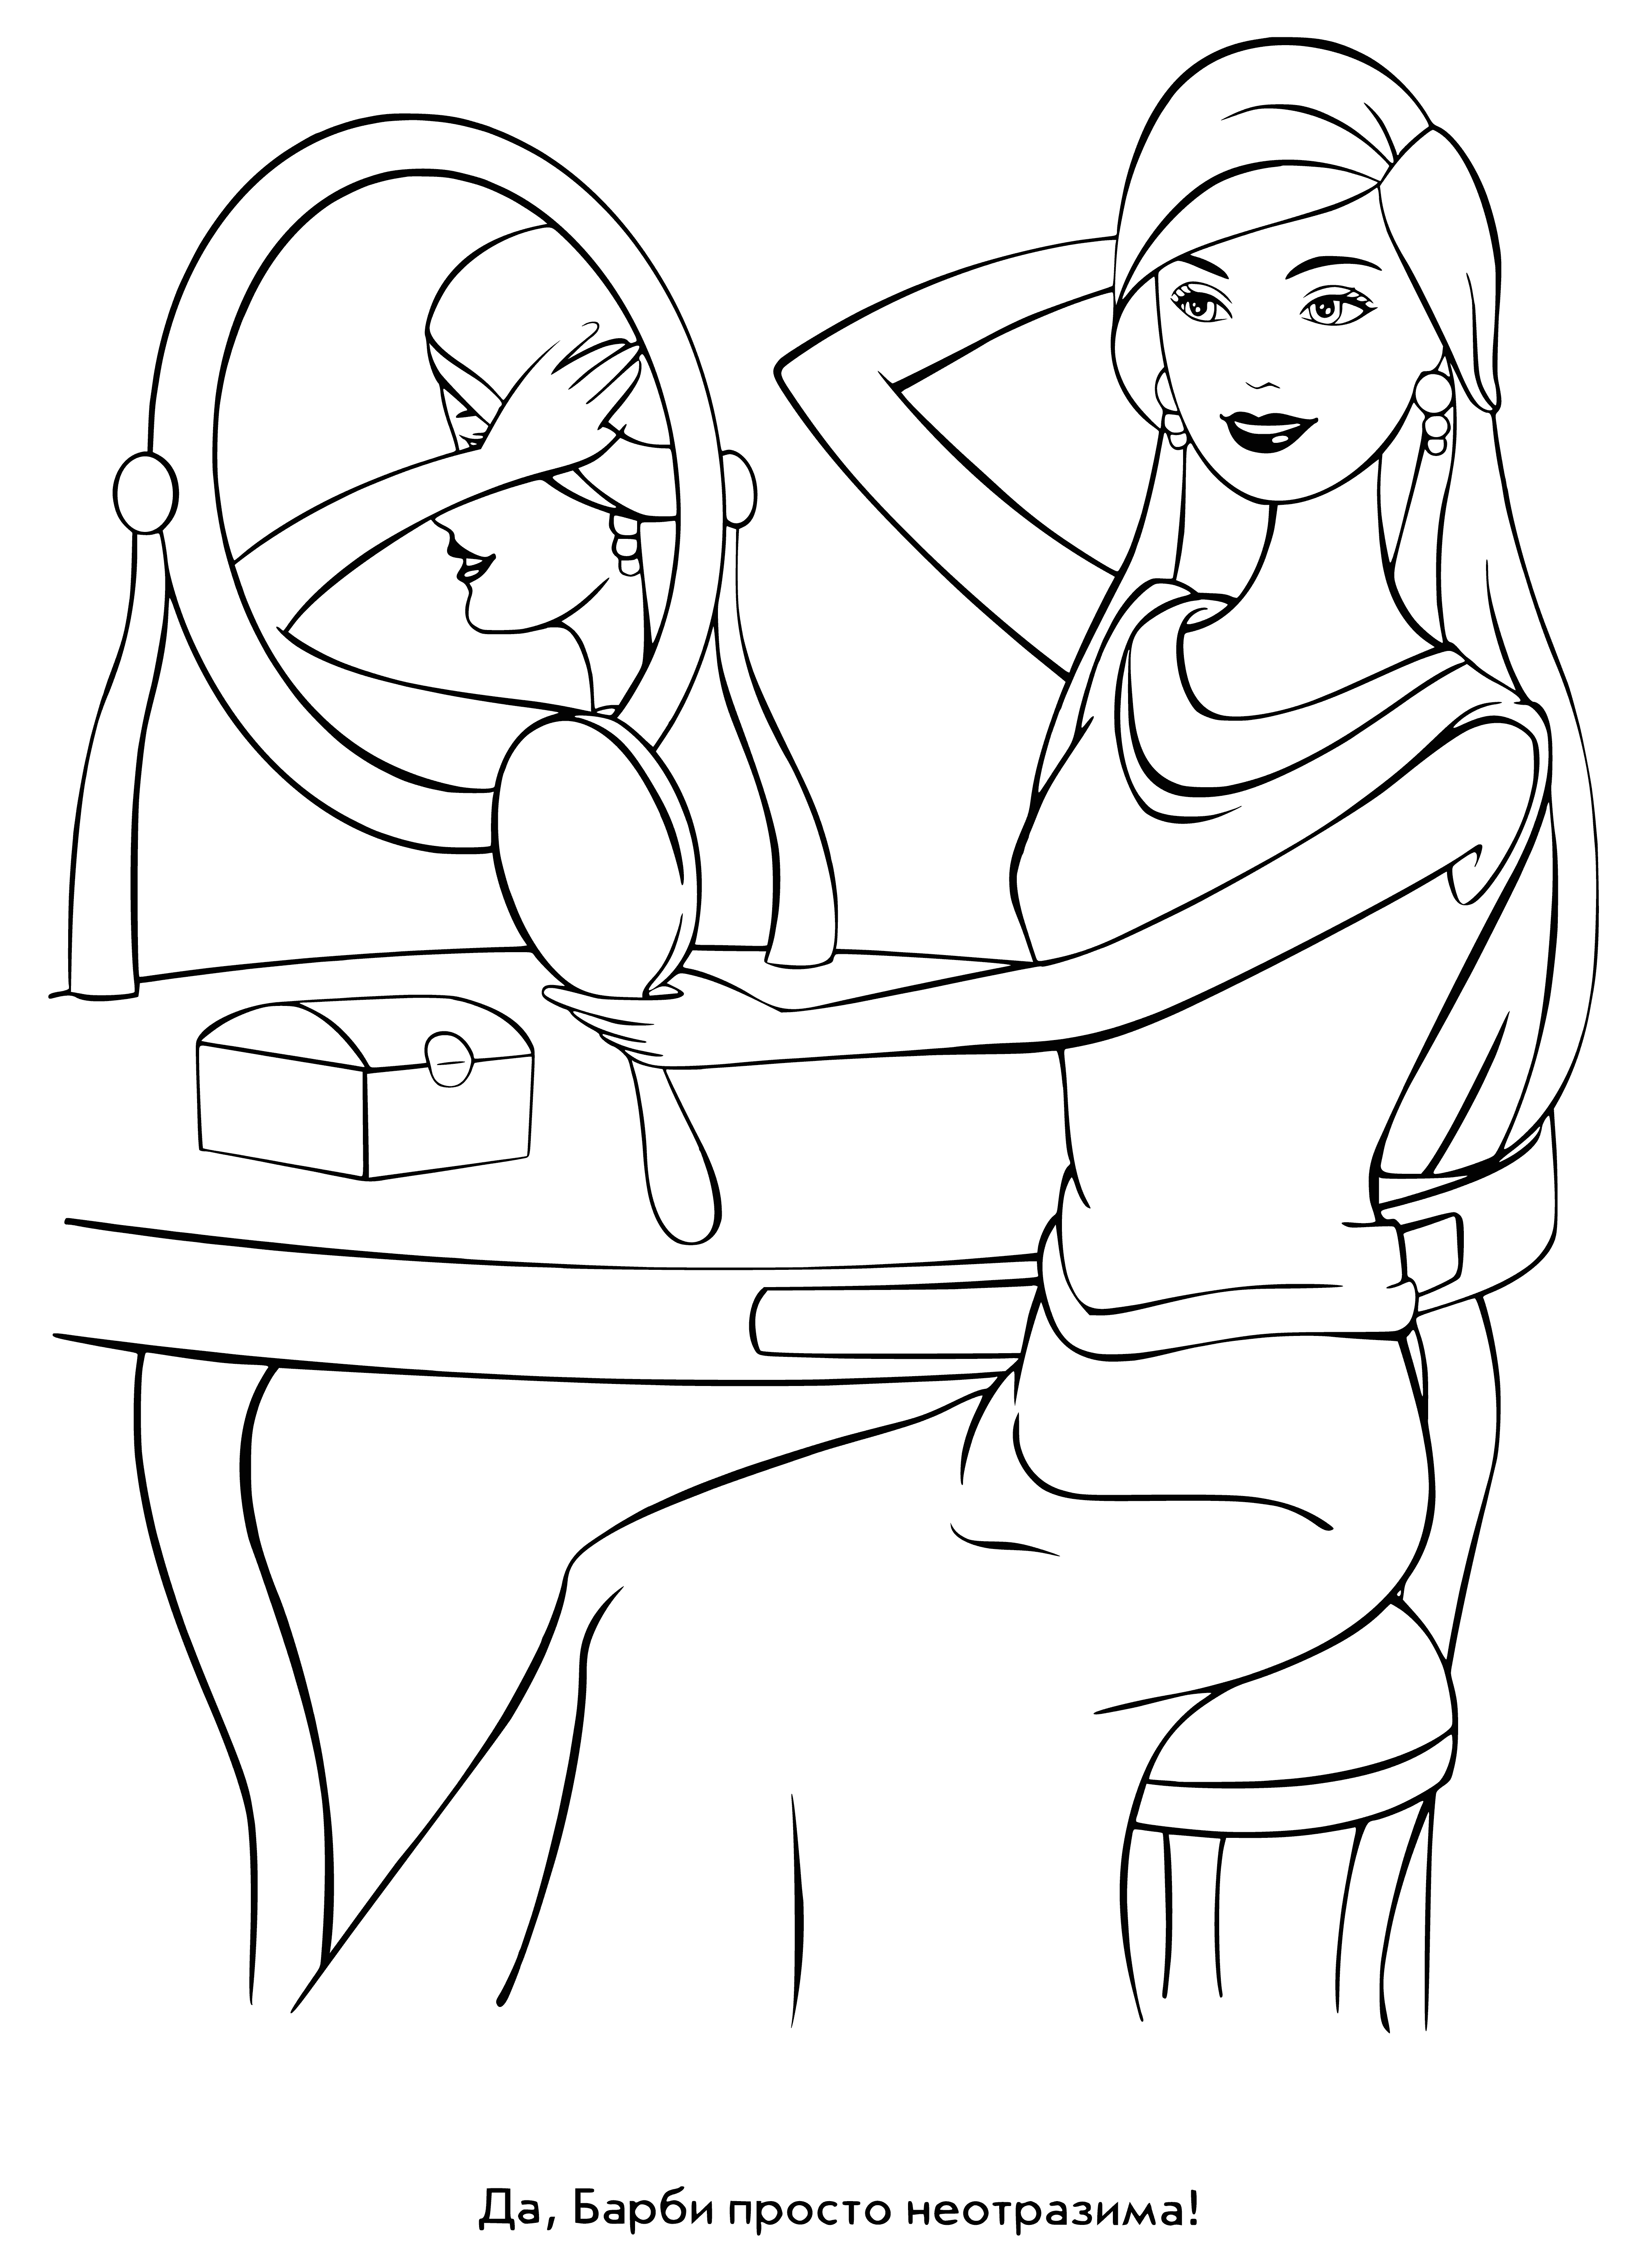 Barbie in front of the mirror coloring page